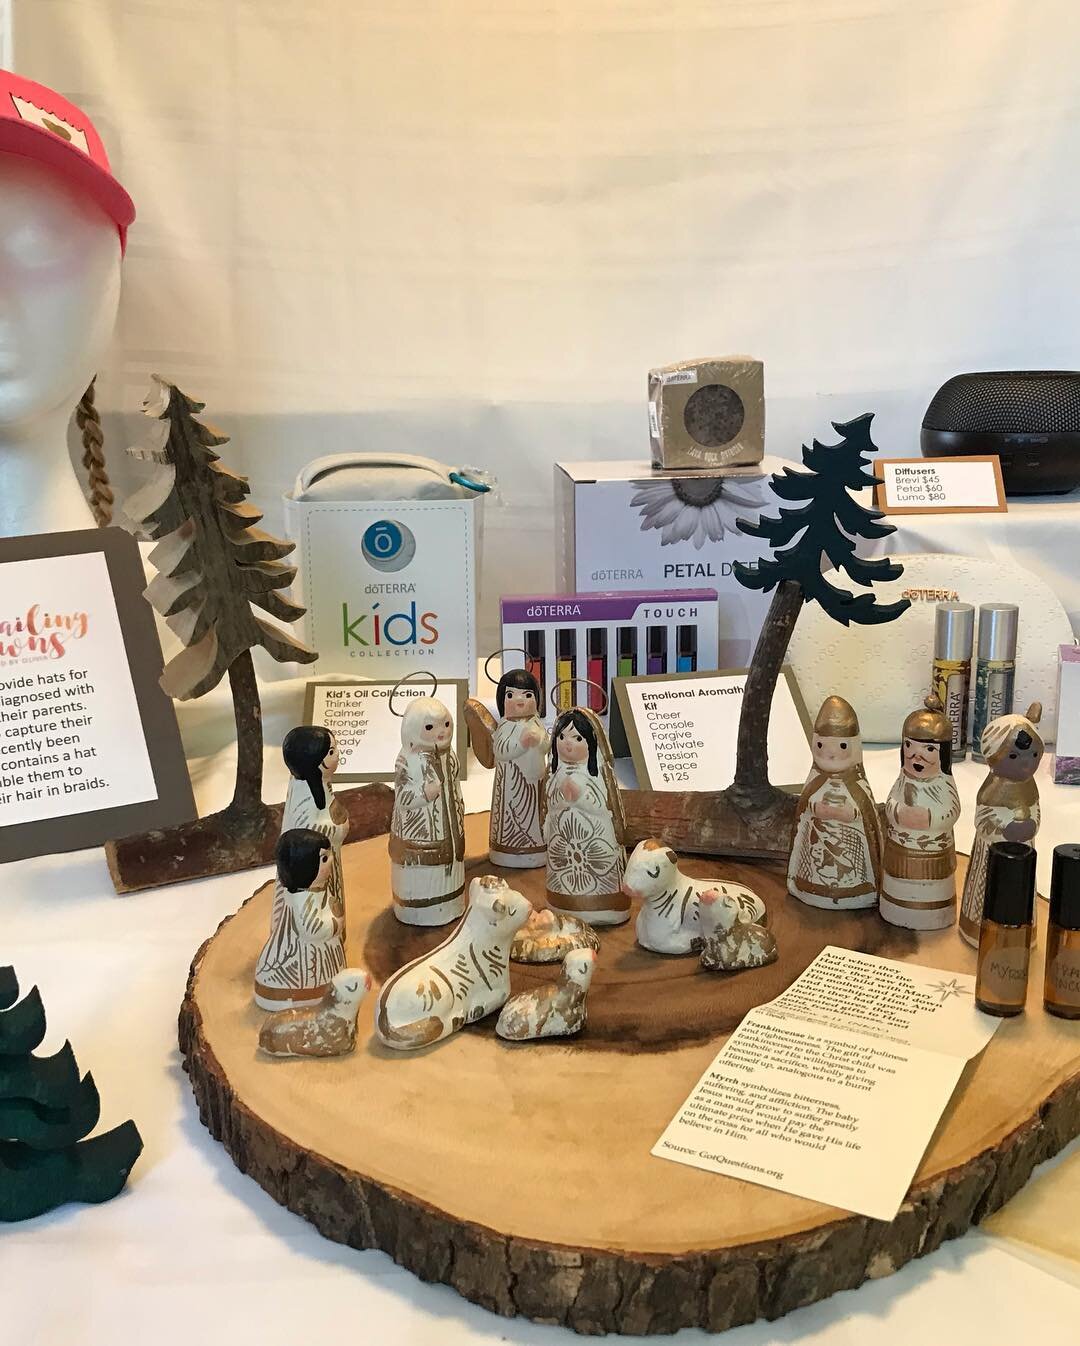 Tomorrow, Saturday December 8th from 9-11am &amp; 2-3:30pm we will be &ldquo;fundraising&rdquo; to get our instructional flyers printed for our kits. 
We will be selling #doTerra essential oils, focusing on #frankincense &amp; #myrrh #fitforaking $15